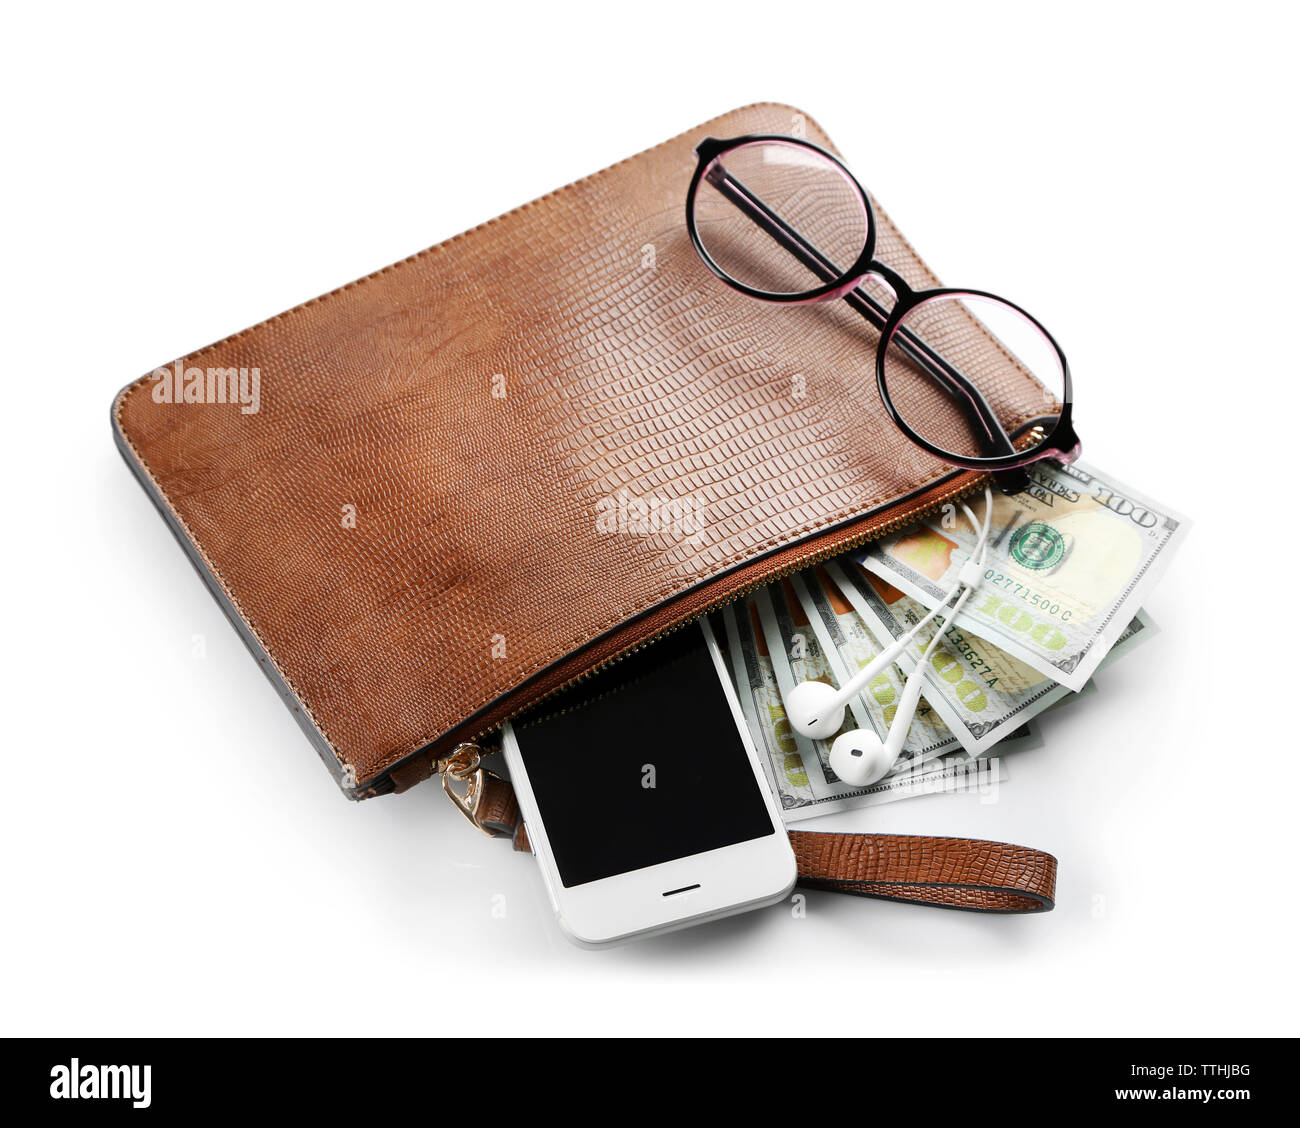 Leather purse with mobile phone, glasses and dollar banknotes, isolated on white Stock Photo